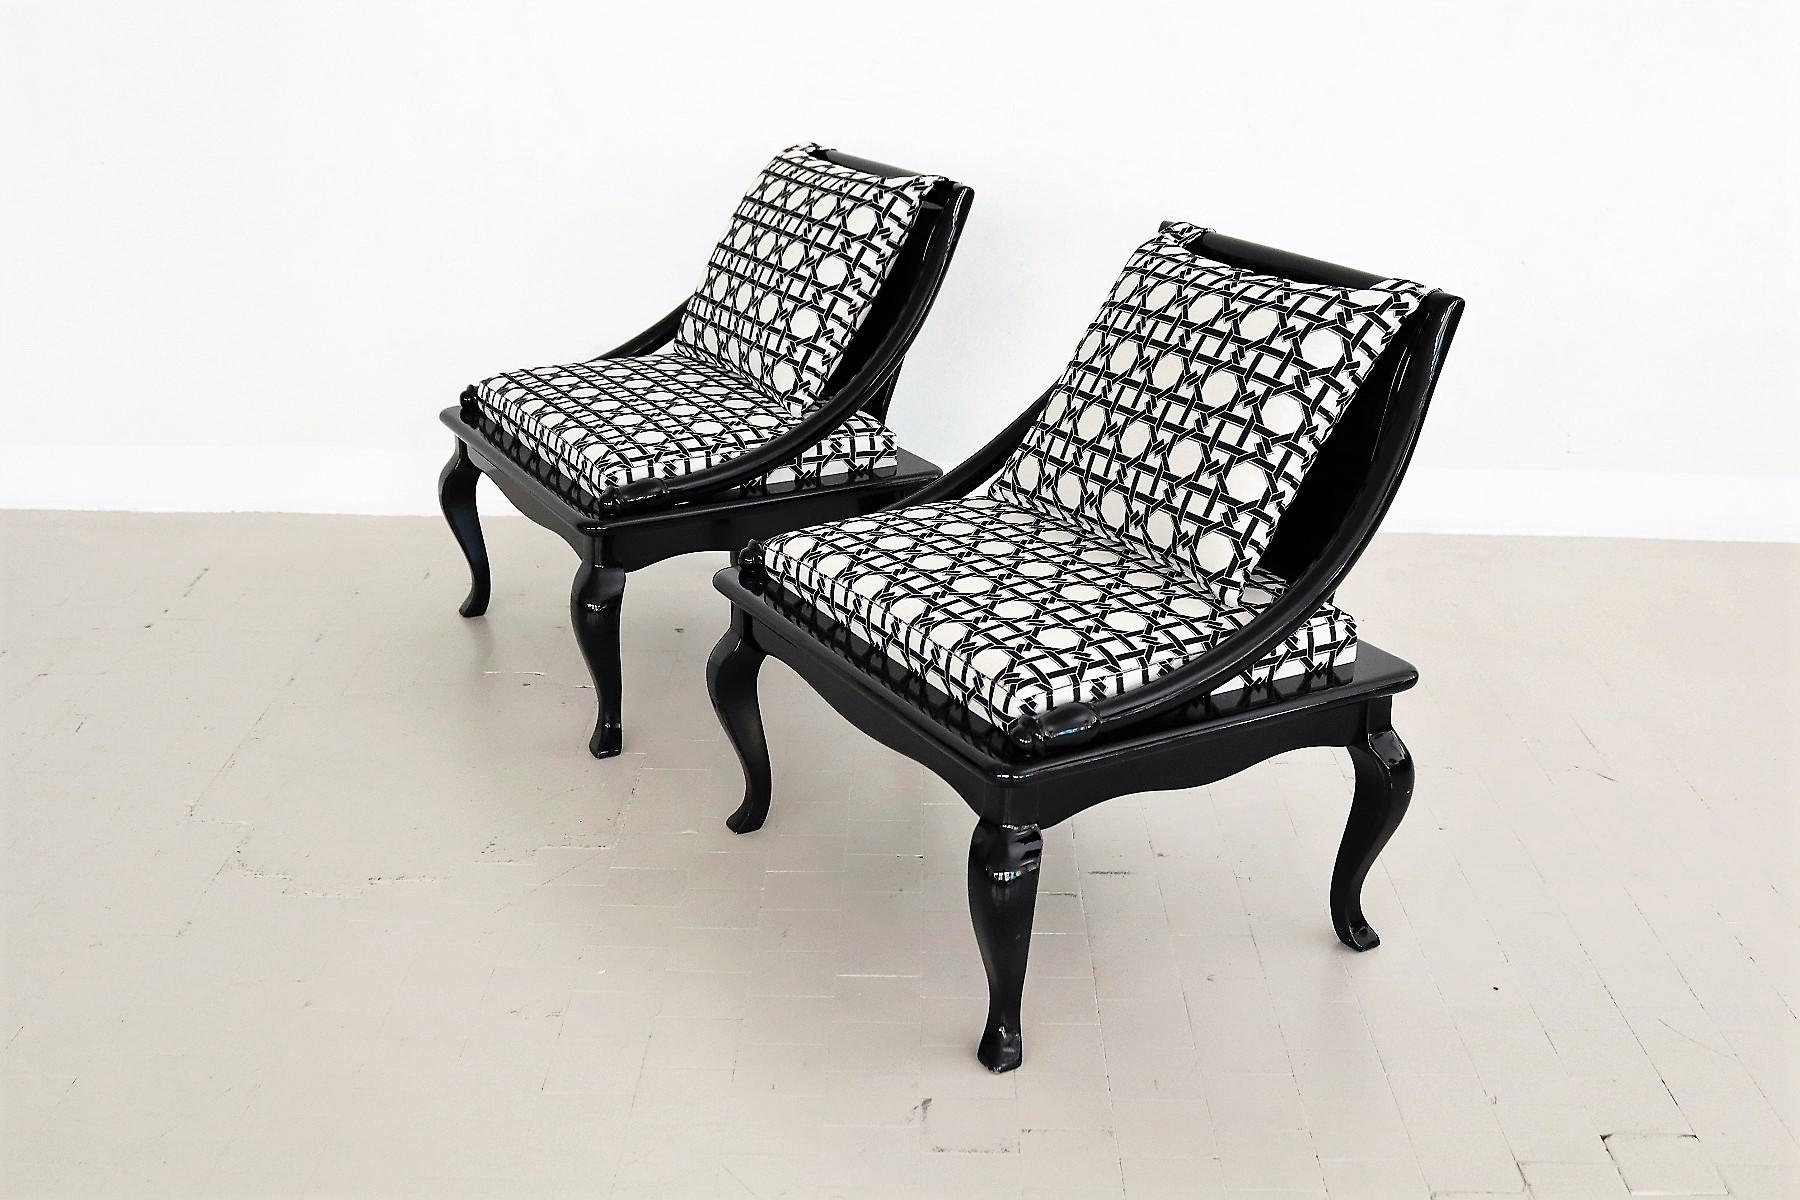 Midcentury Asian Side Chairs in Black Lacquer Wood and New Upholstery, 1970s For Sale 4